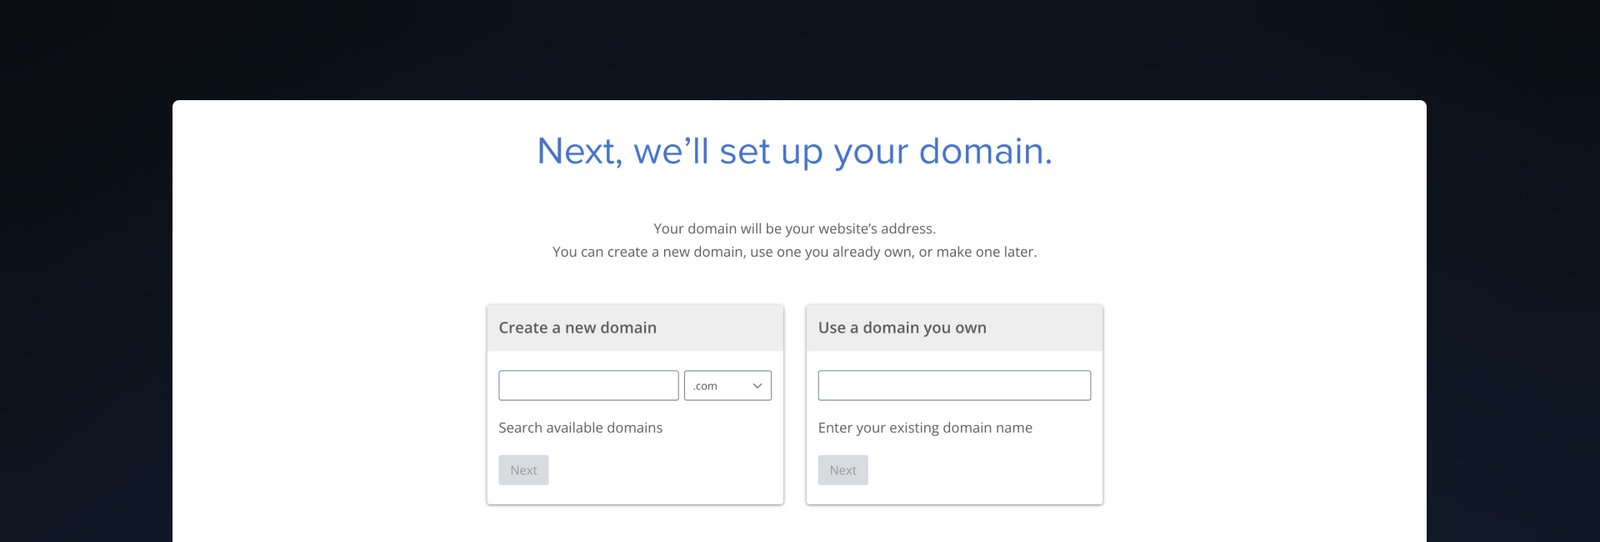 Domain creation in Bluehost